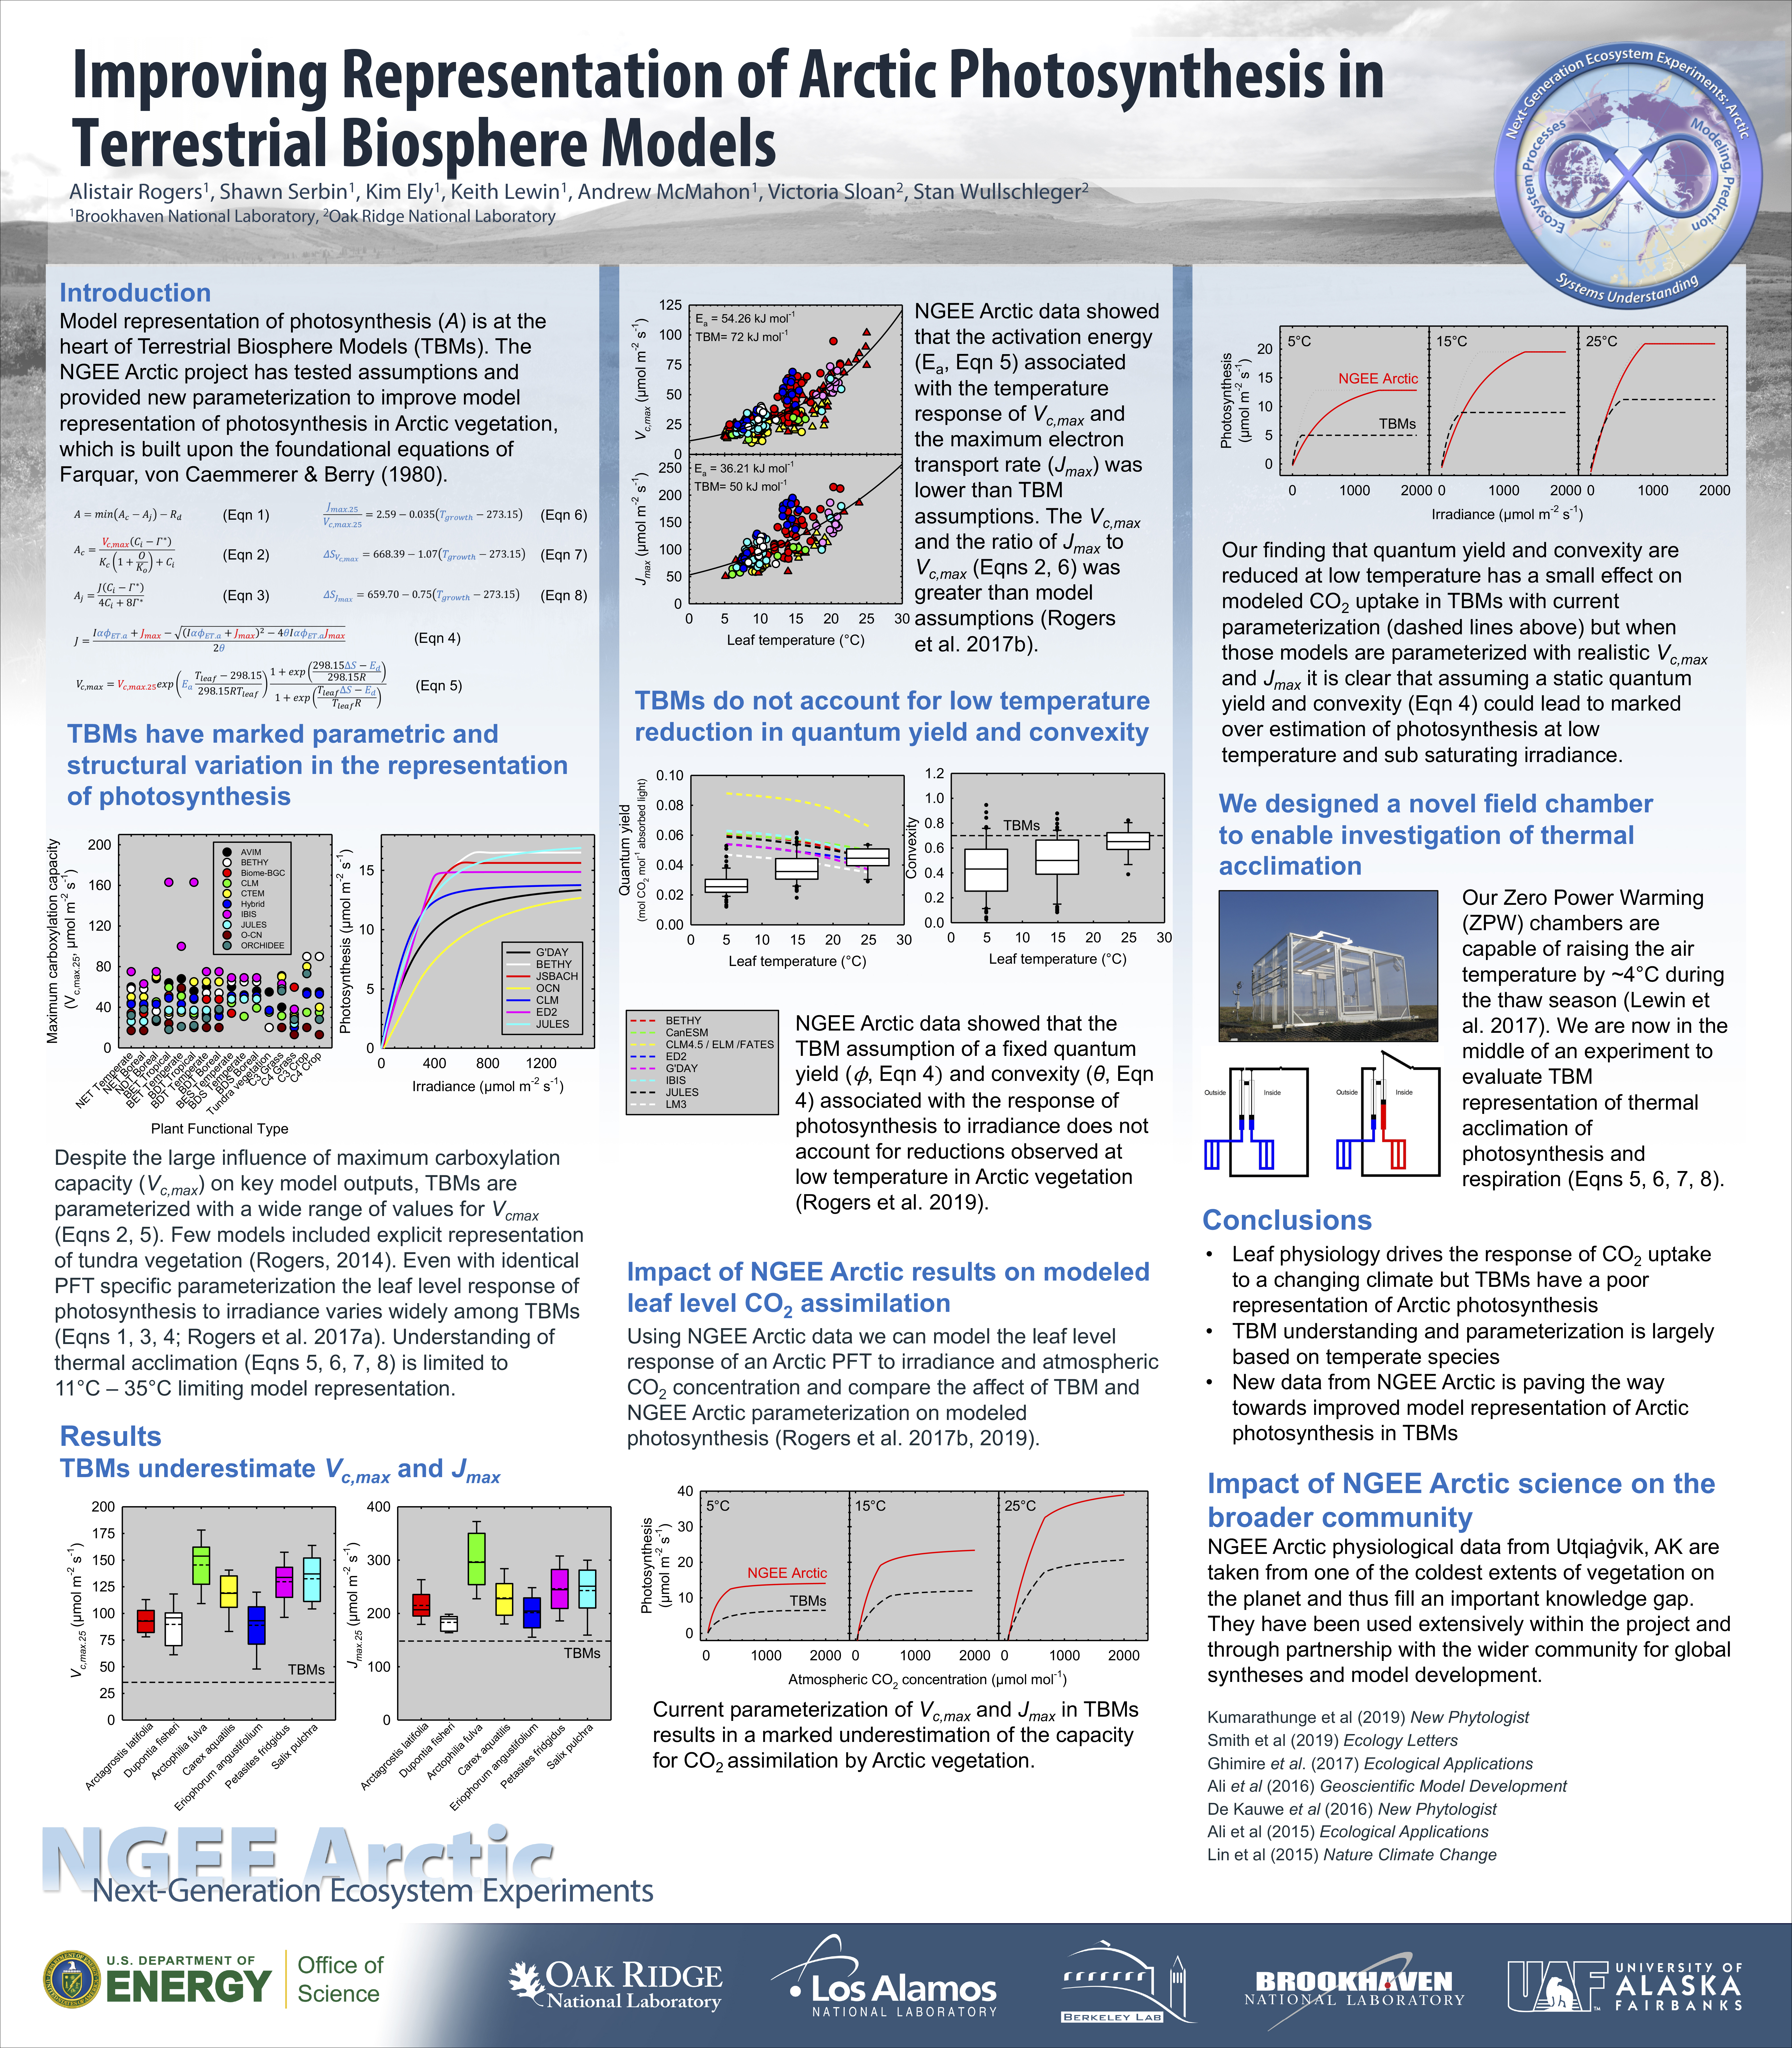 Improving Representation of Arctic Photosynthesis in Terrestrial Biosphere Models poster